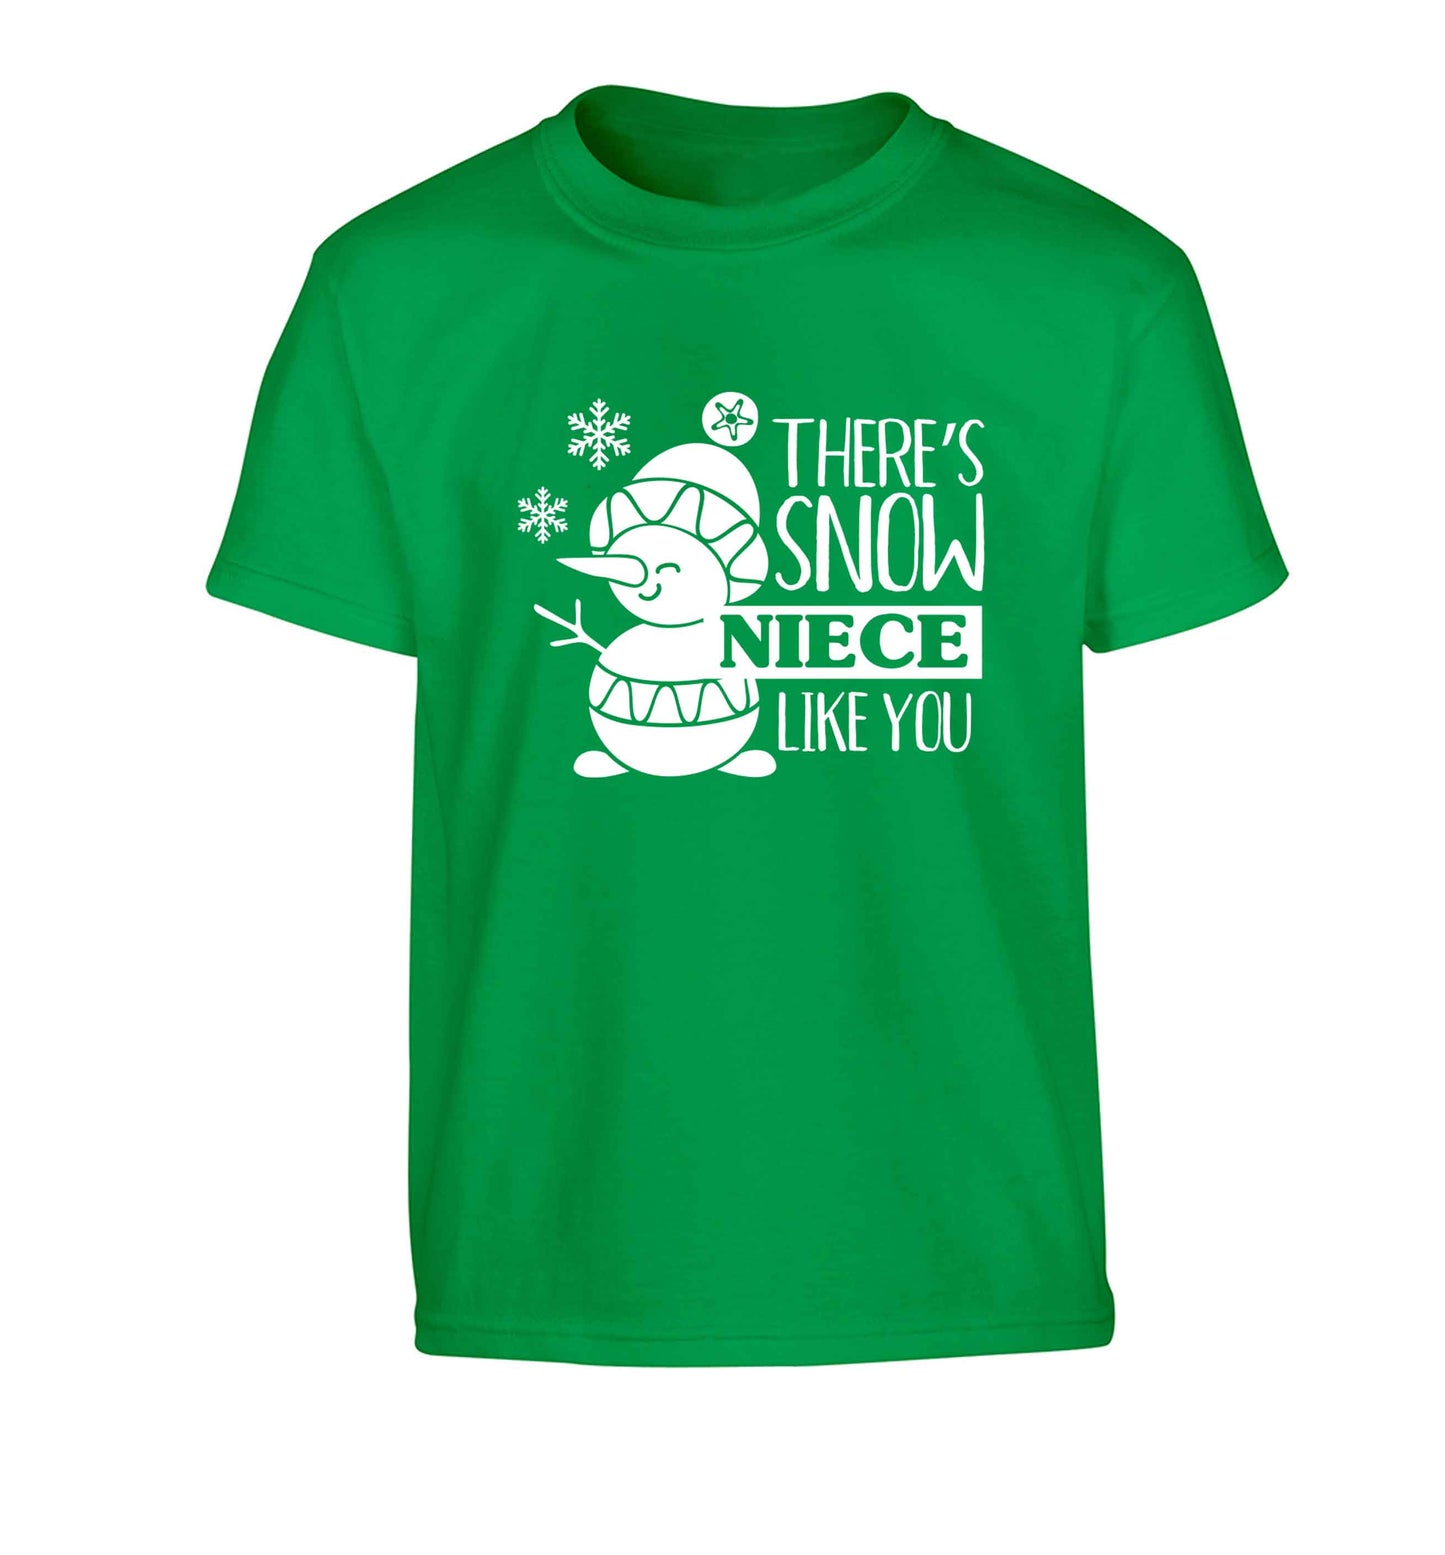 There's snow niece like you Children's green Tshirt 12-13 Years